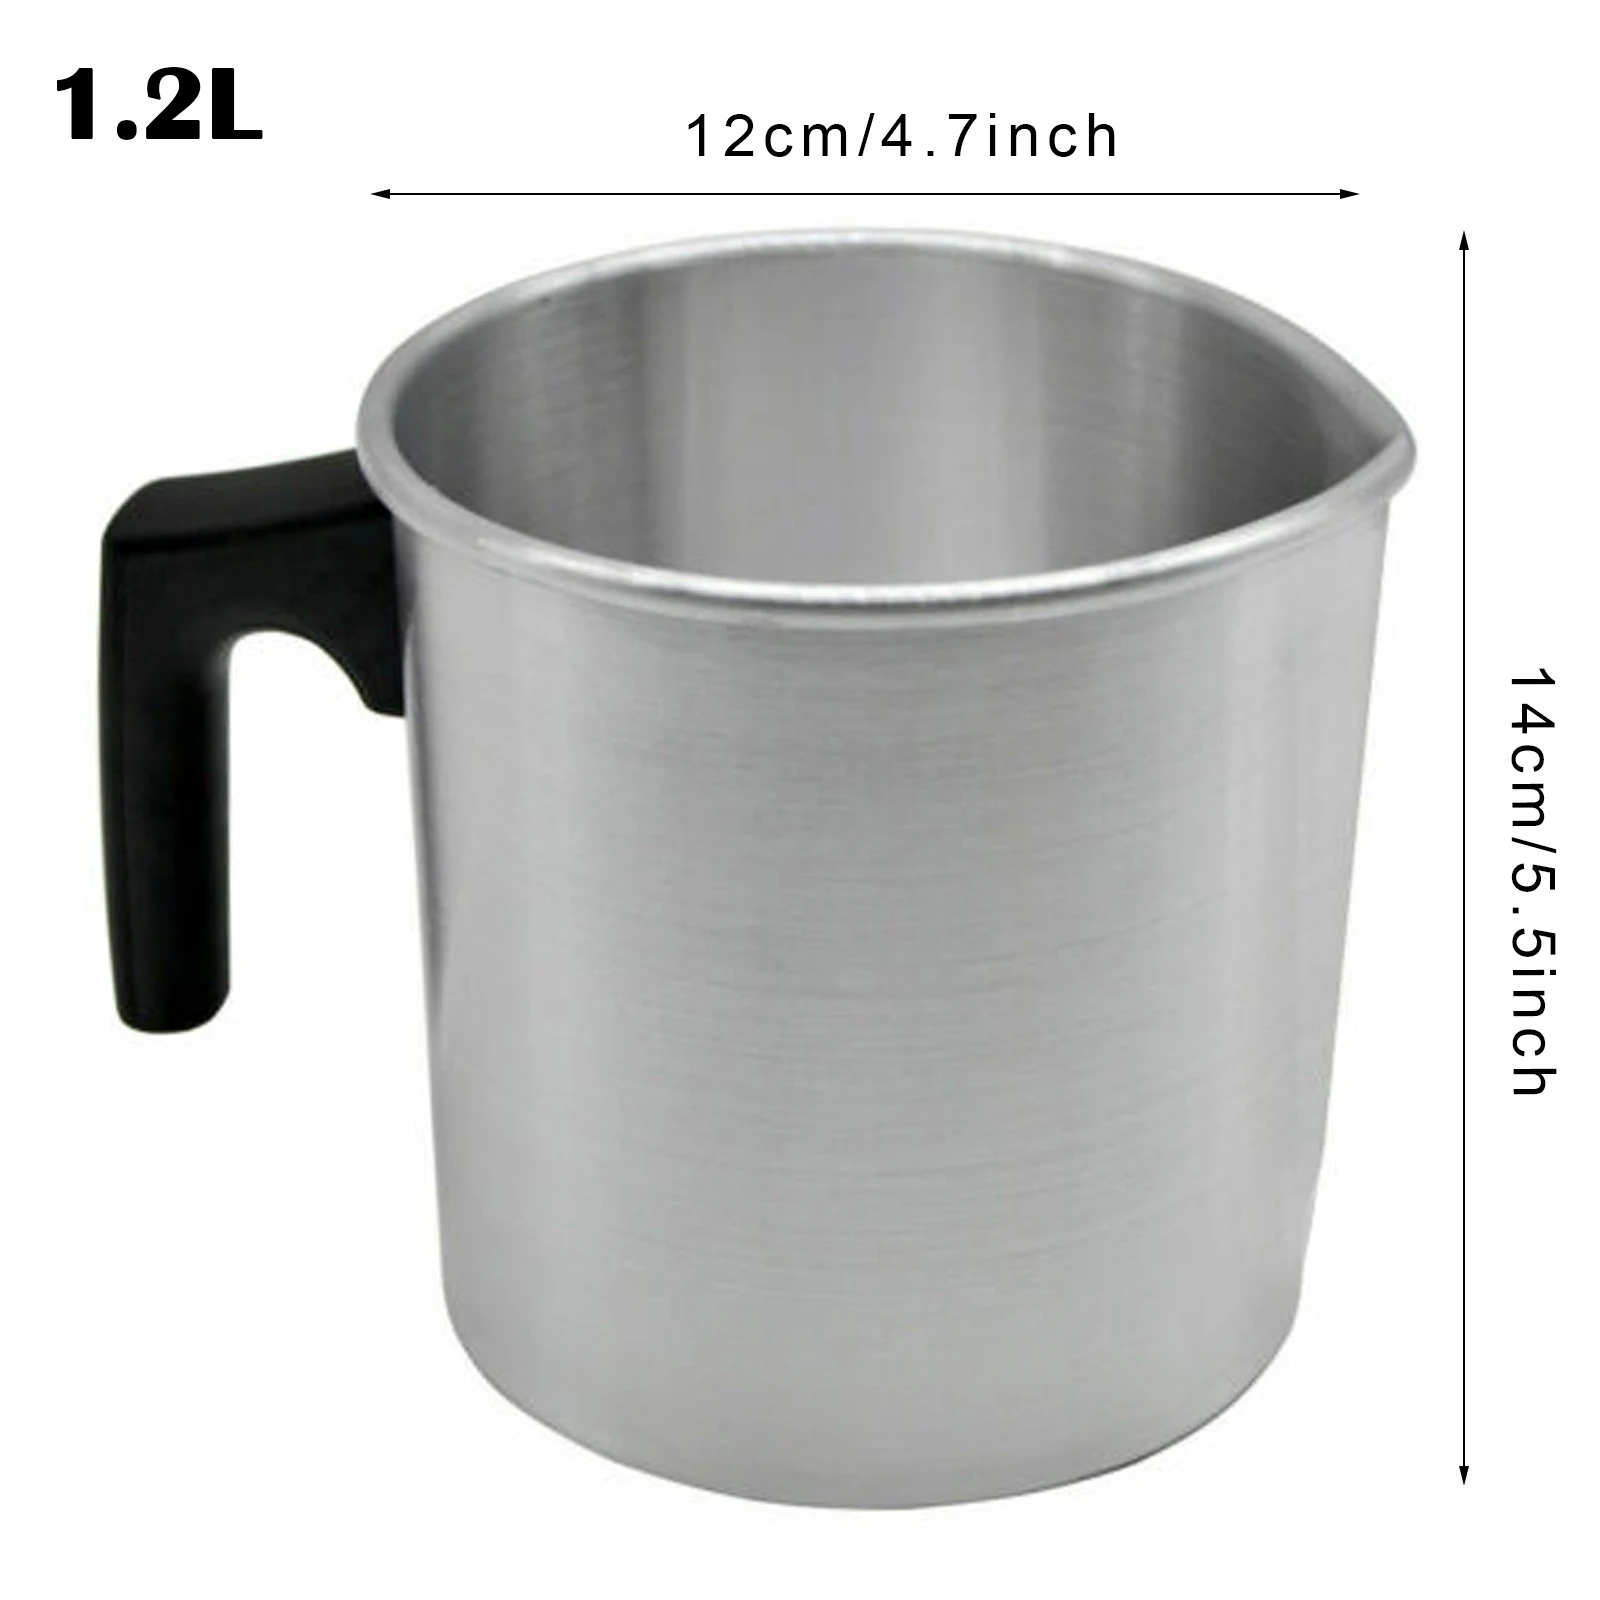 Candle Melting Pot Stainless Steel Wax Melting Cup Wax Melting Pot  Chocolate Pouring Pitcher Pot Home Candle DIY Melt Gardgets - AliExpress